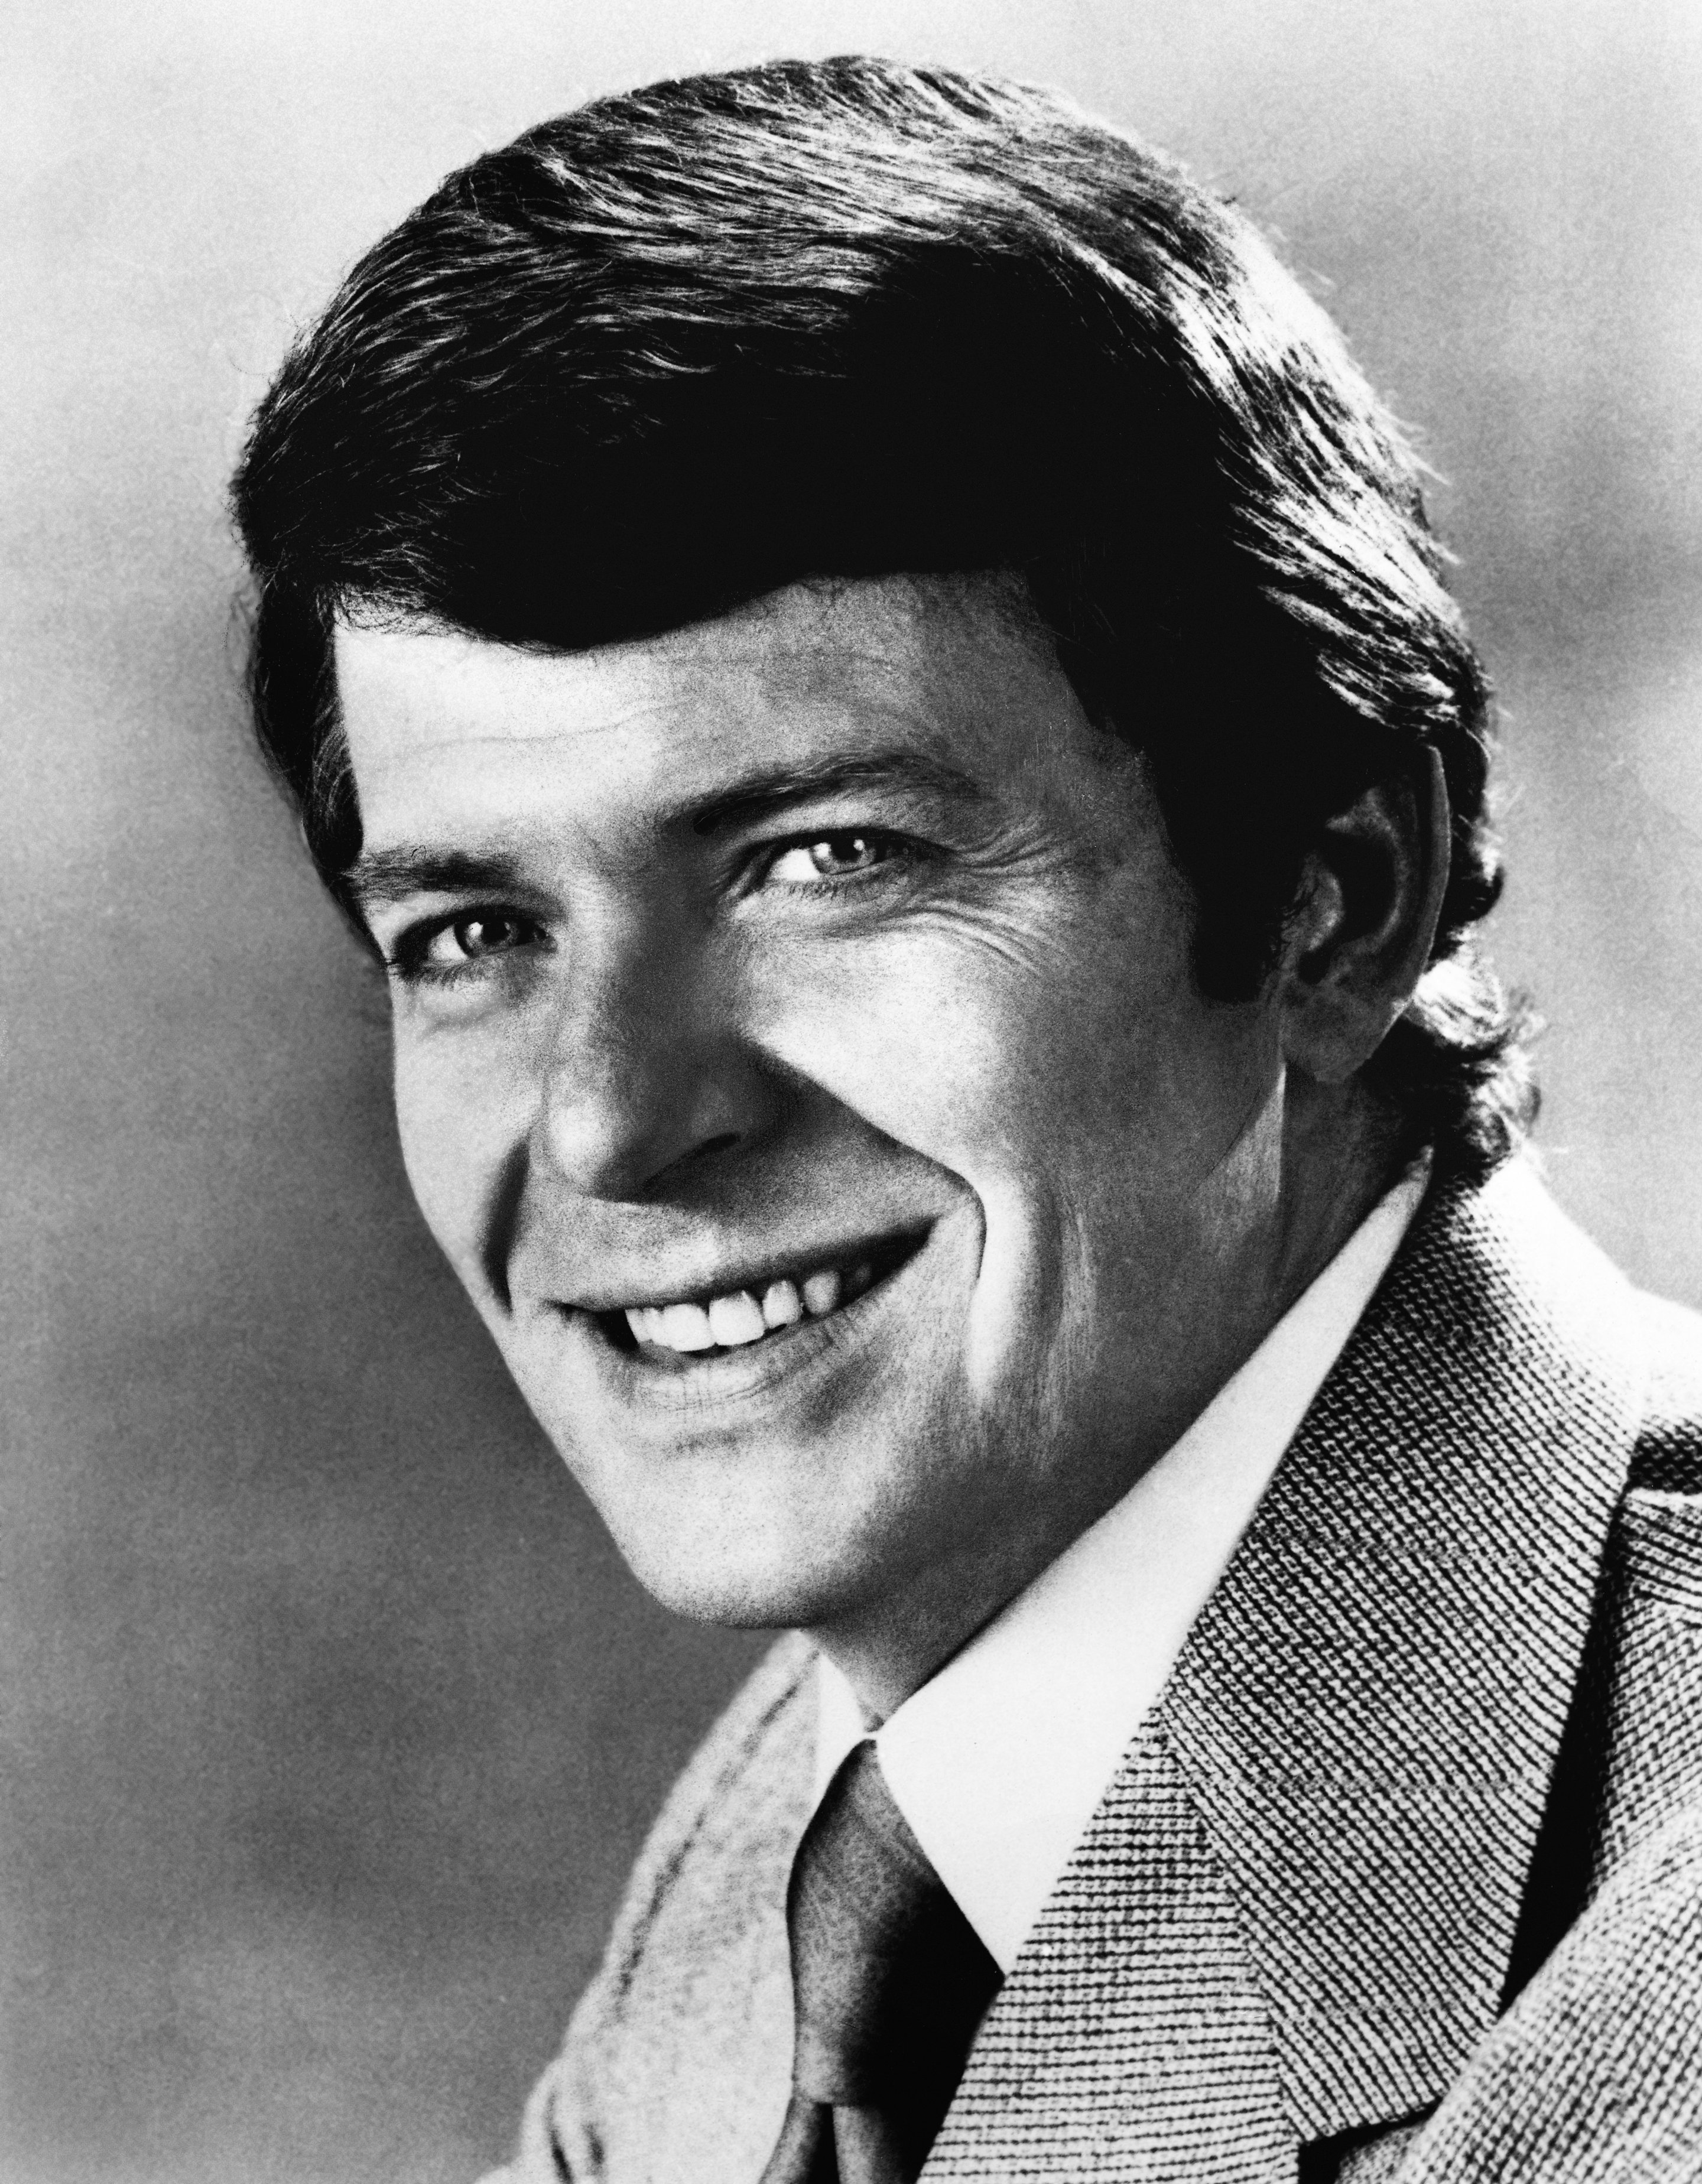 A portrait of Robert Reed from "The Brady Bunch" | Photo: Getty Images